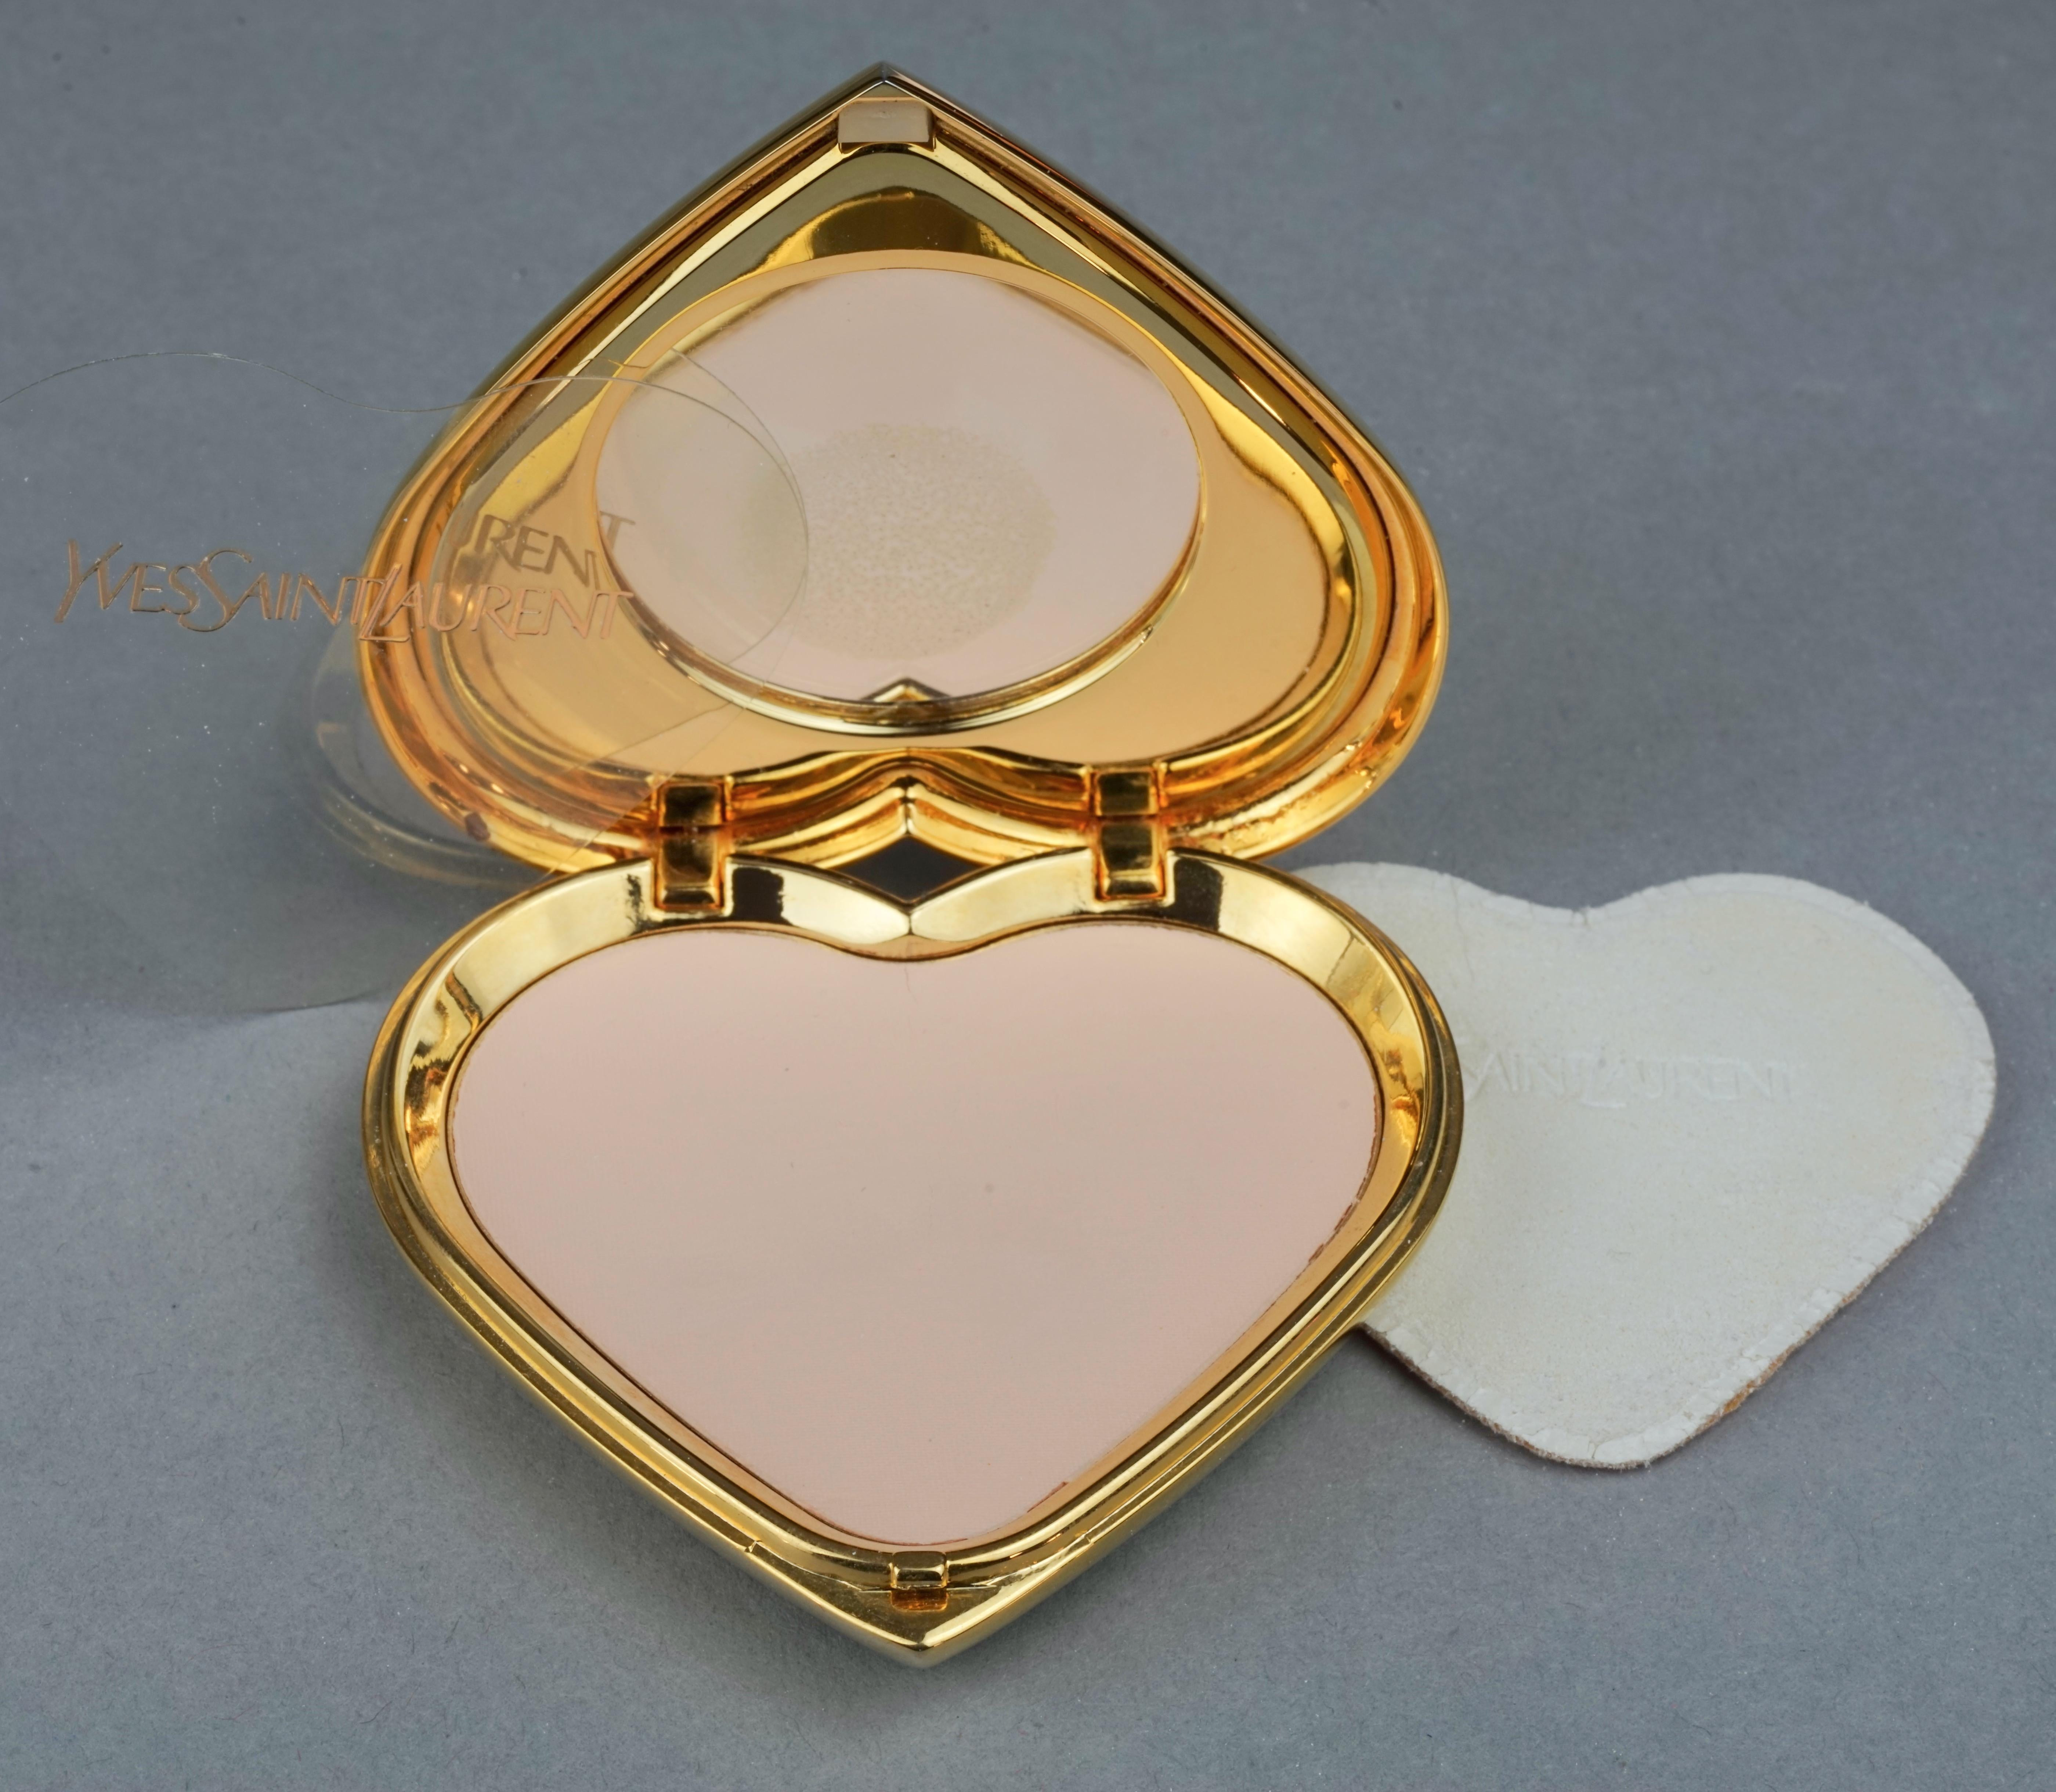 Vintage YVES SAINT LAURENT by Robert Goossens Heart Jewelled Compact Powder

Measurements:
Height: 2.63 inches (6.7 cm)
Width: 2.63 inches (6.7 cm)

Features:
- 100% Authentic YVES SAINT LAURENT by Robert Goossens.
- Heart clear rhinestone jewelled